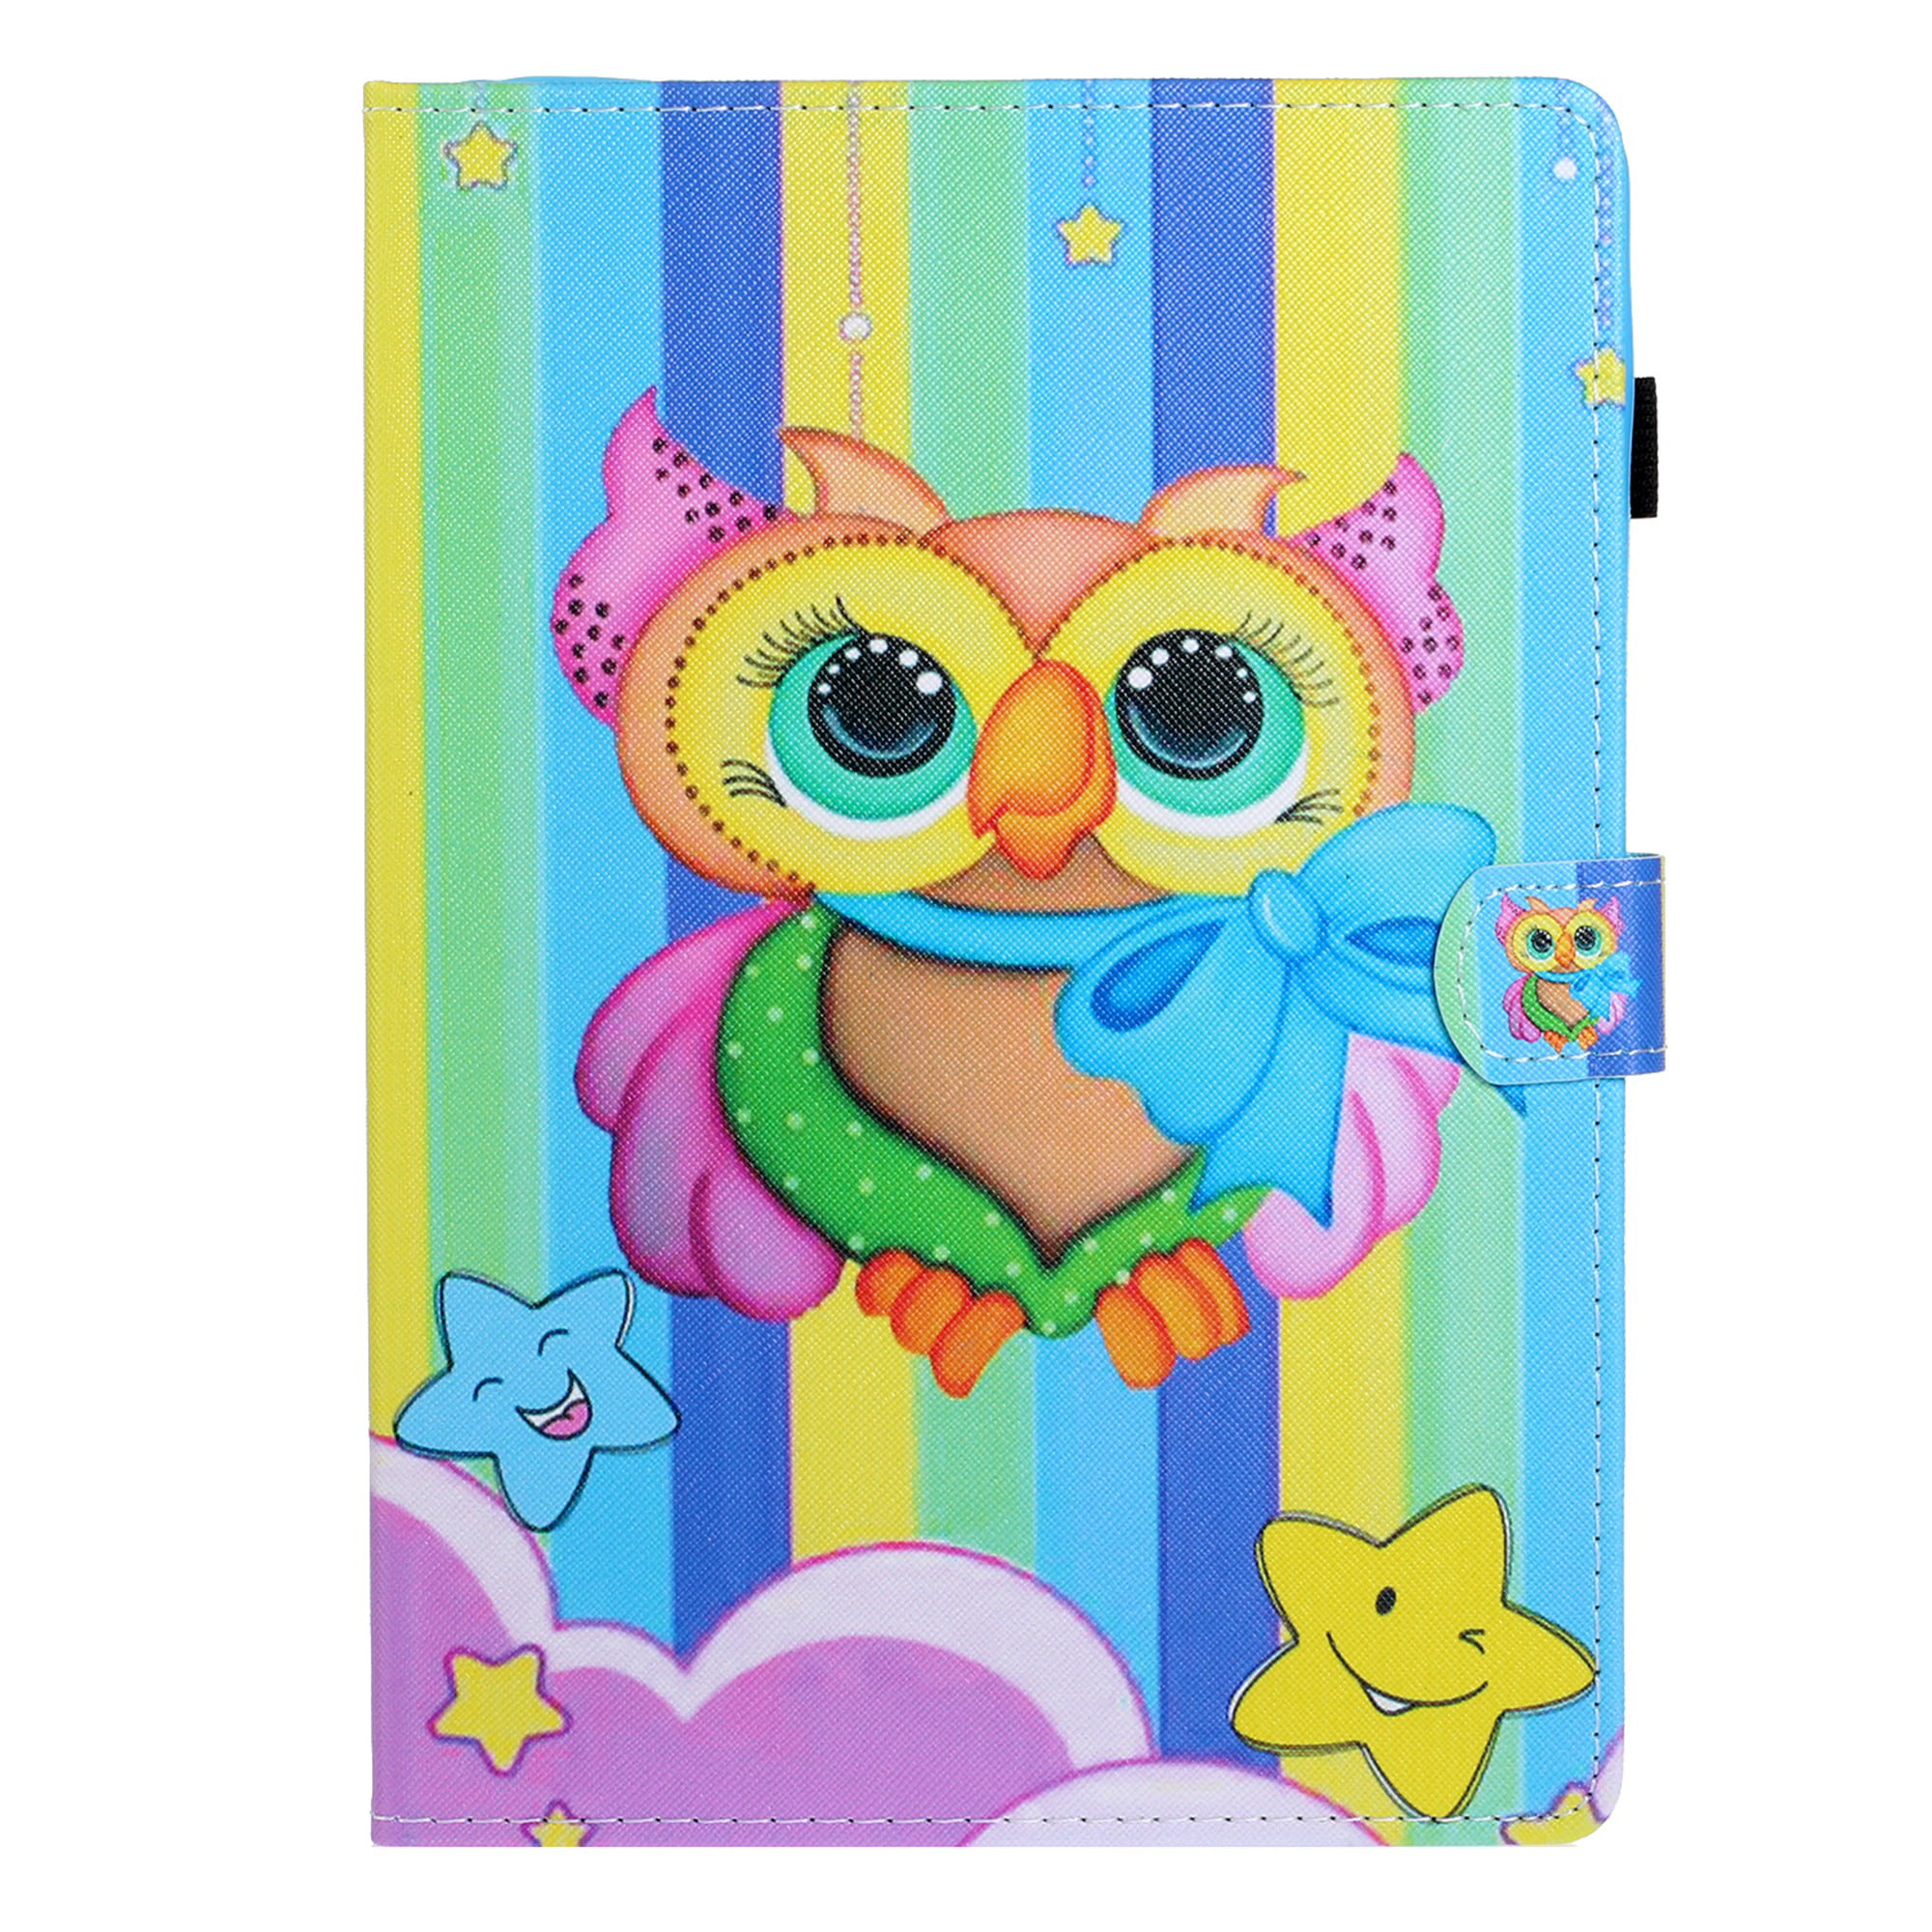 Coque iPad 9,7 pouces 2017/2018, inShang coque ipad 2018/2017 Smart Cover  pour iPad air 9,7 pouces 2017/2018 iPad Air 2, support